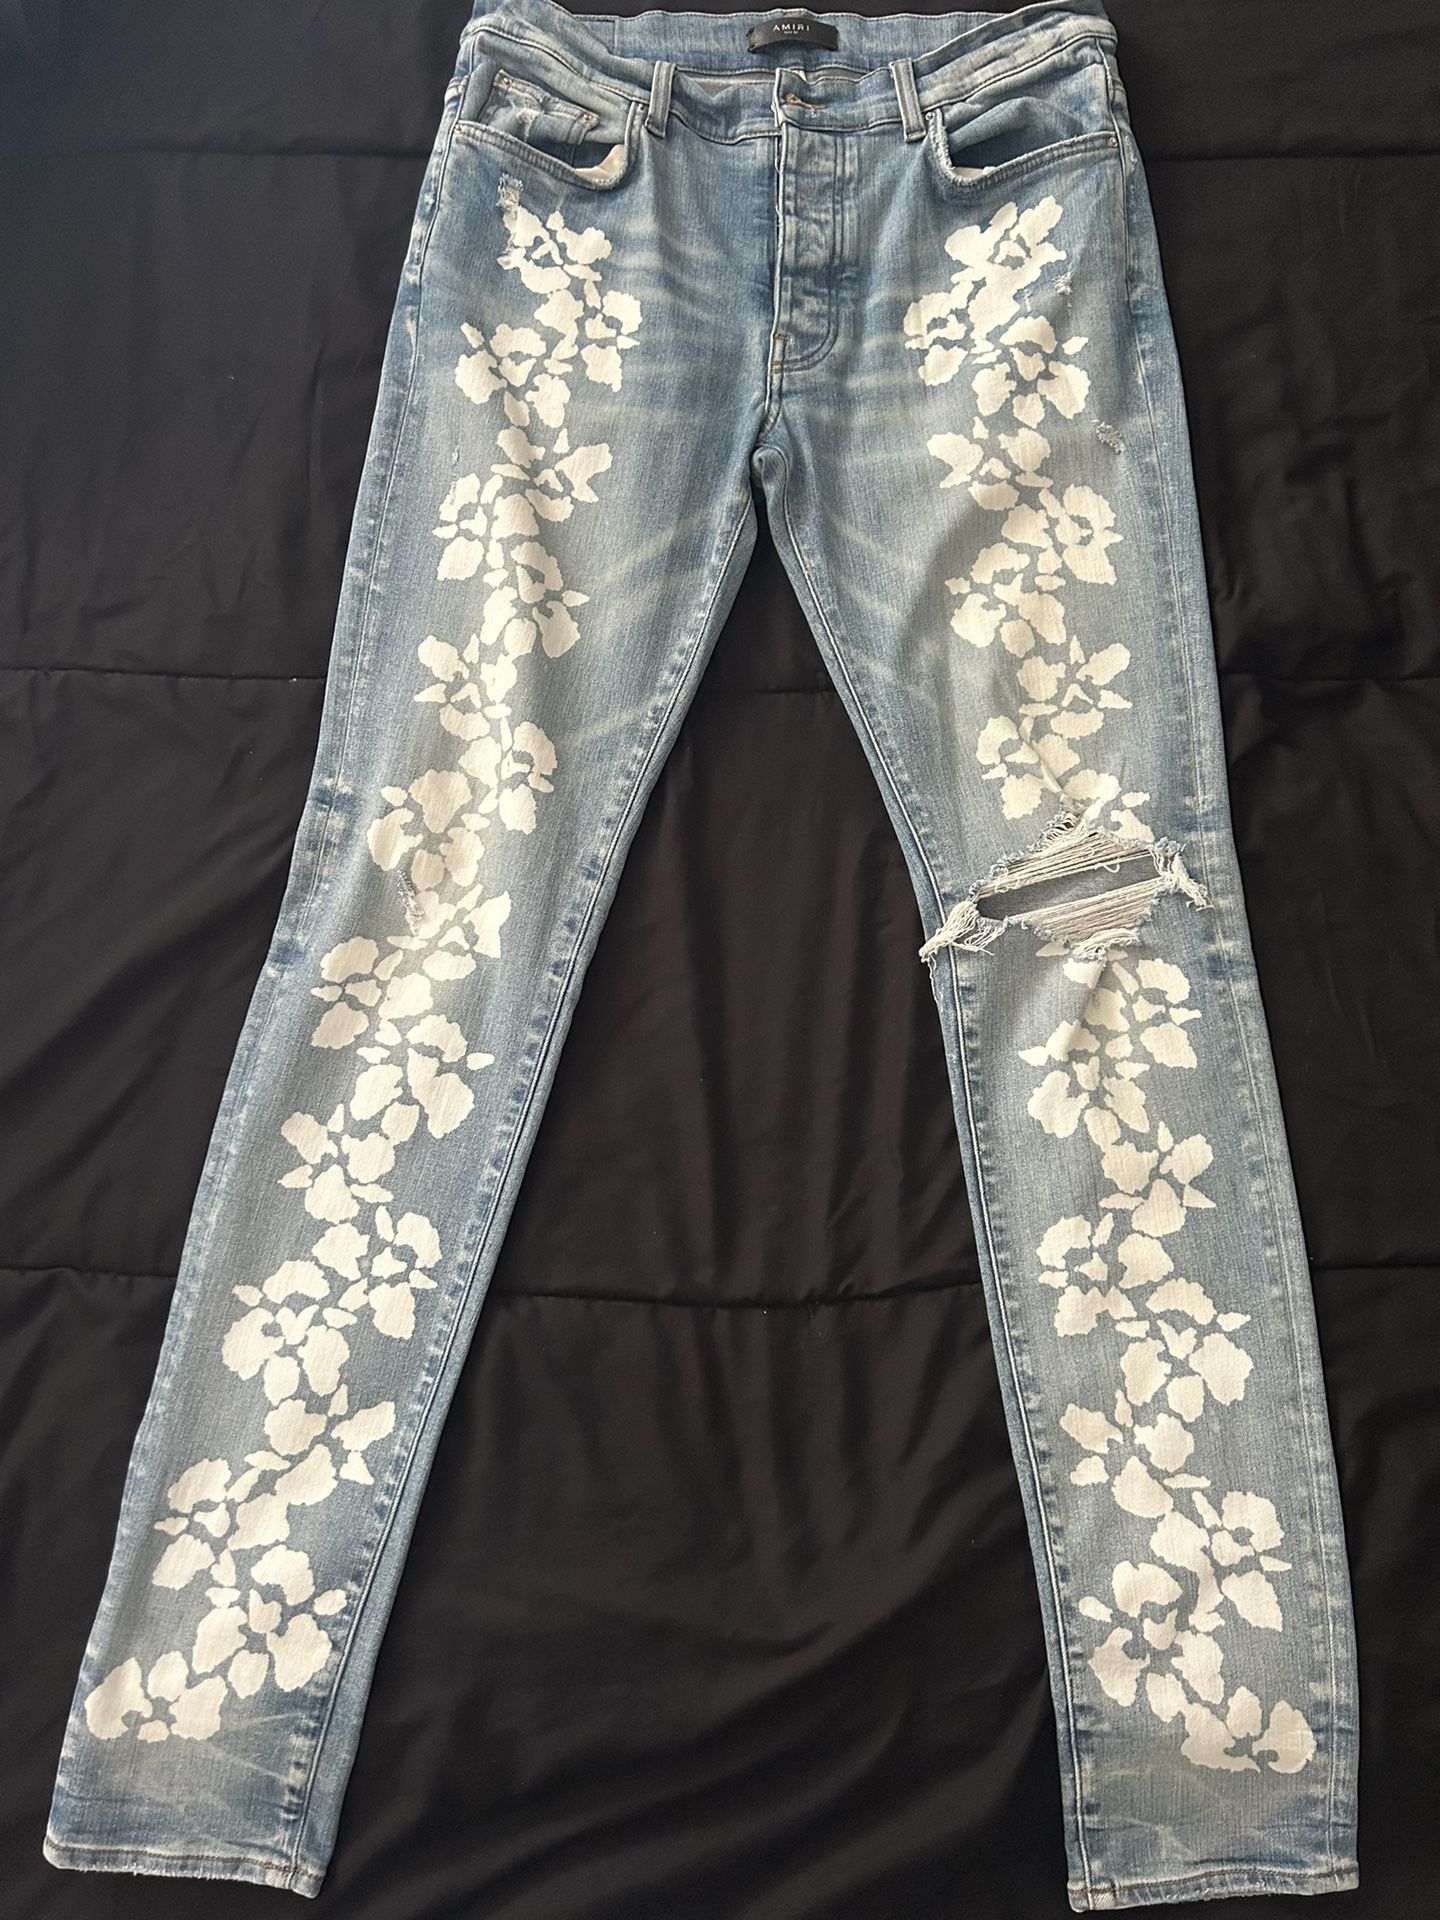 SIZE 34 AMIRI JEANS FOR SALE for Sale Baltimore, MD OfferUp